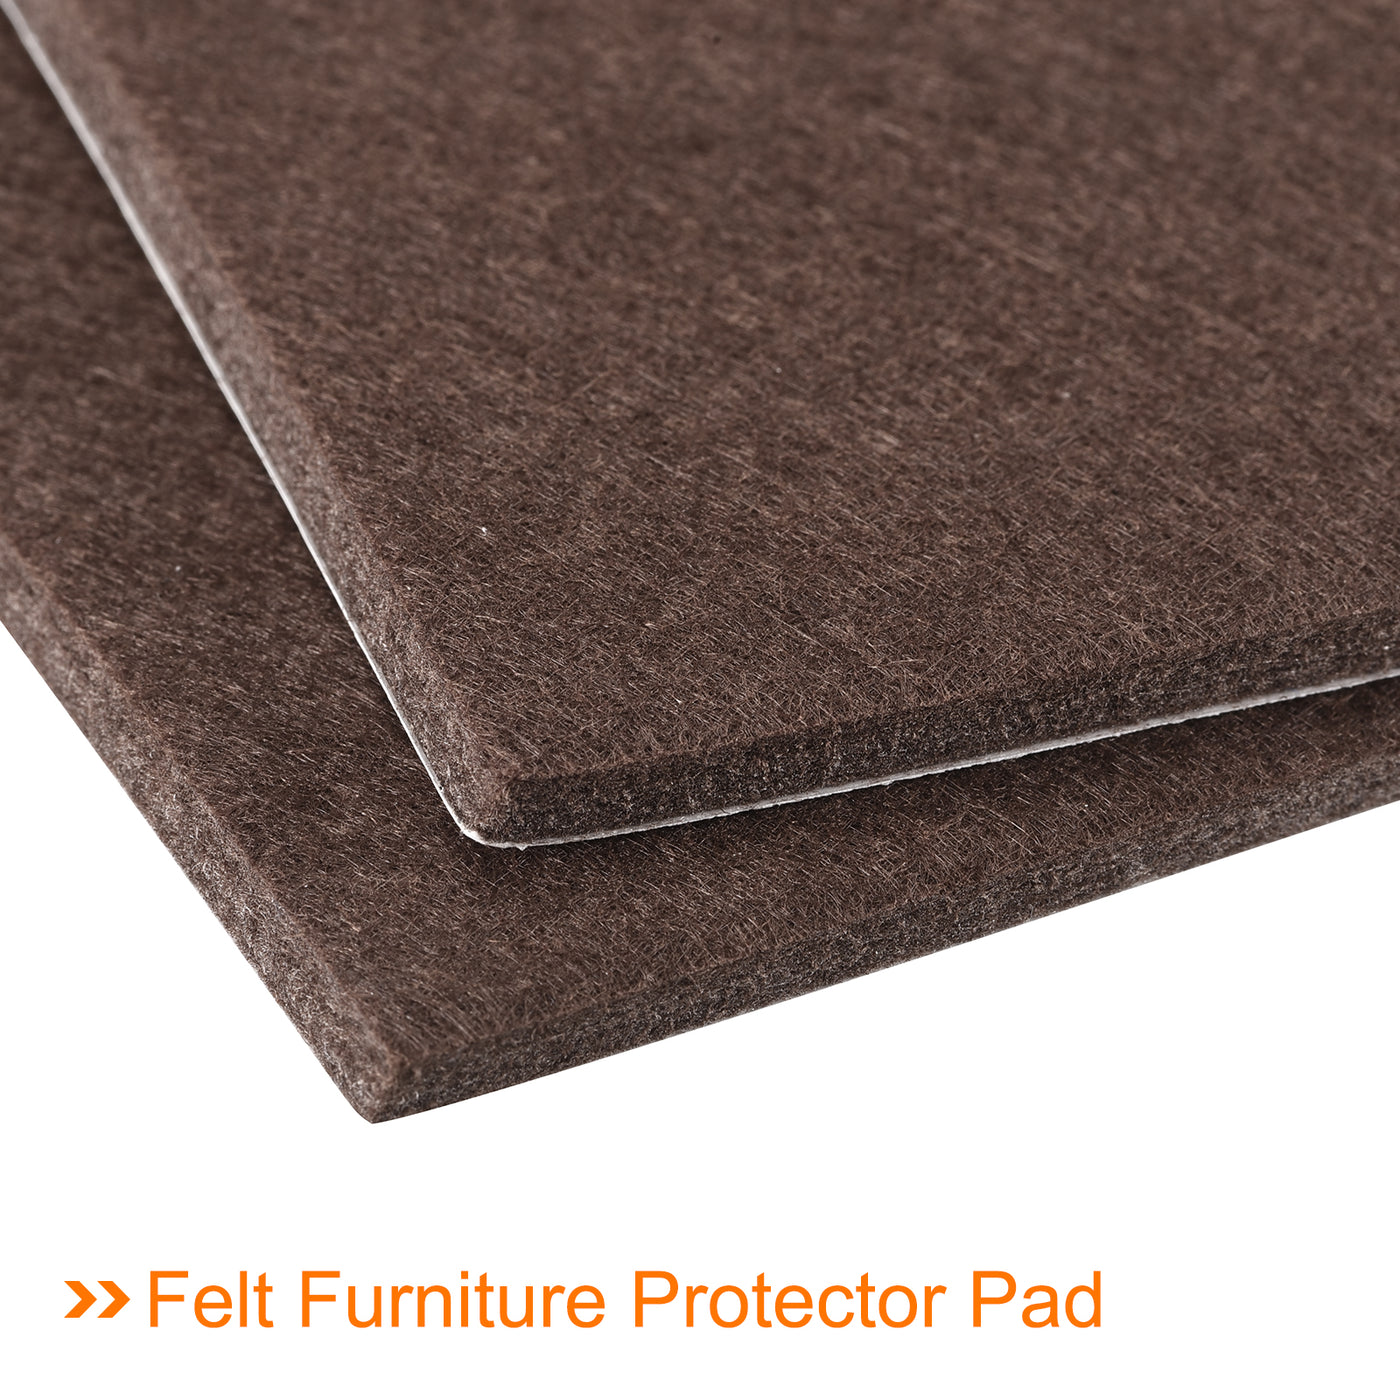 uxcell Uxcell Felt Furniture Pads, 38mm x 38mm Self Adhesive Square Floor Protectors for Furniture Legs Hardwood Floor, Brown 24Pcs